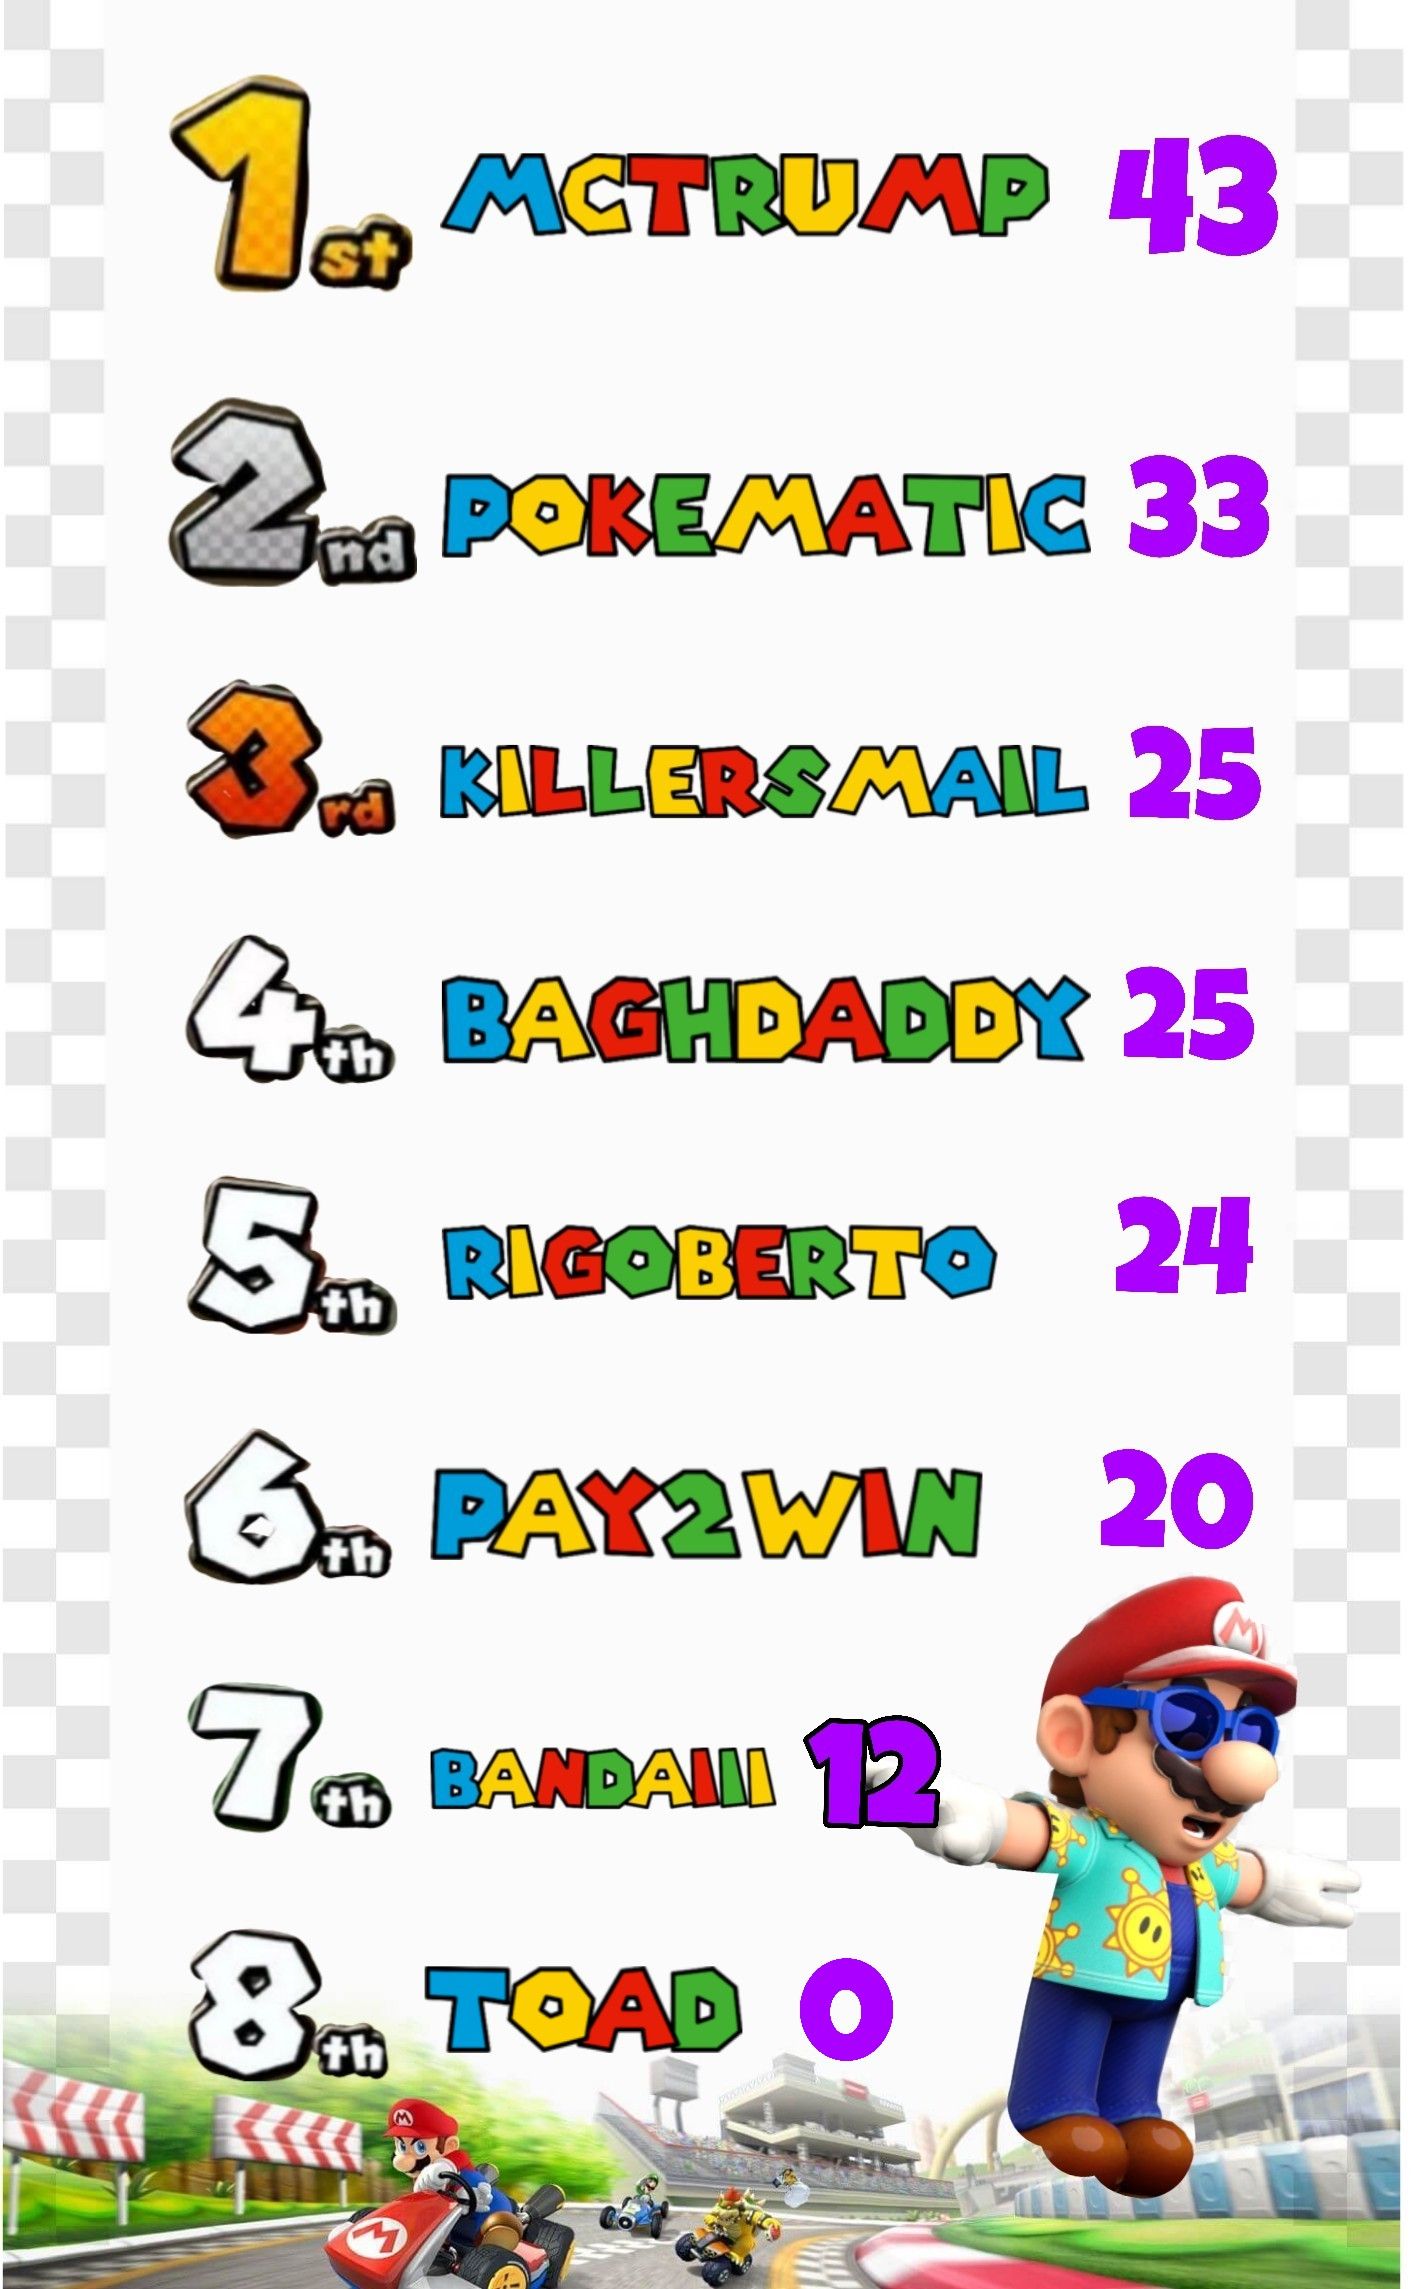 Updated leaderboard for March Meme Revival! Some new contestants; and mctrump gains 1st place